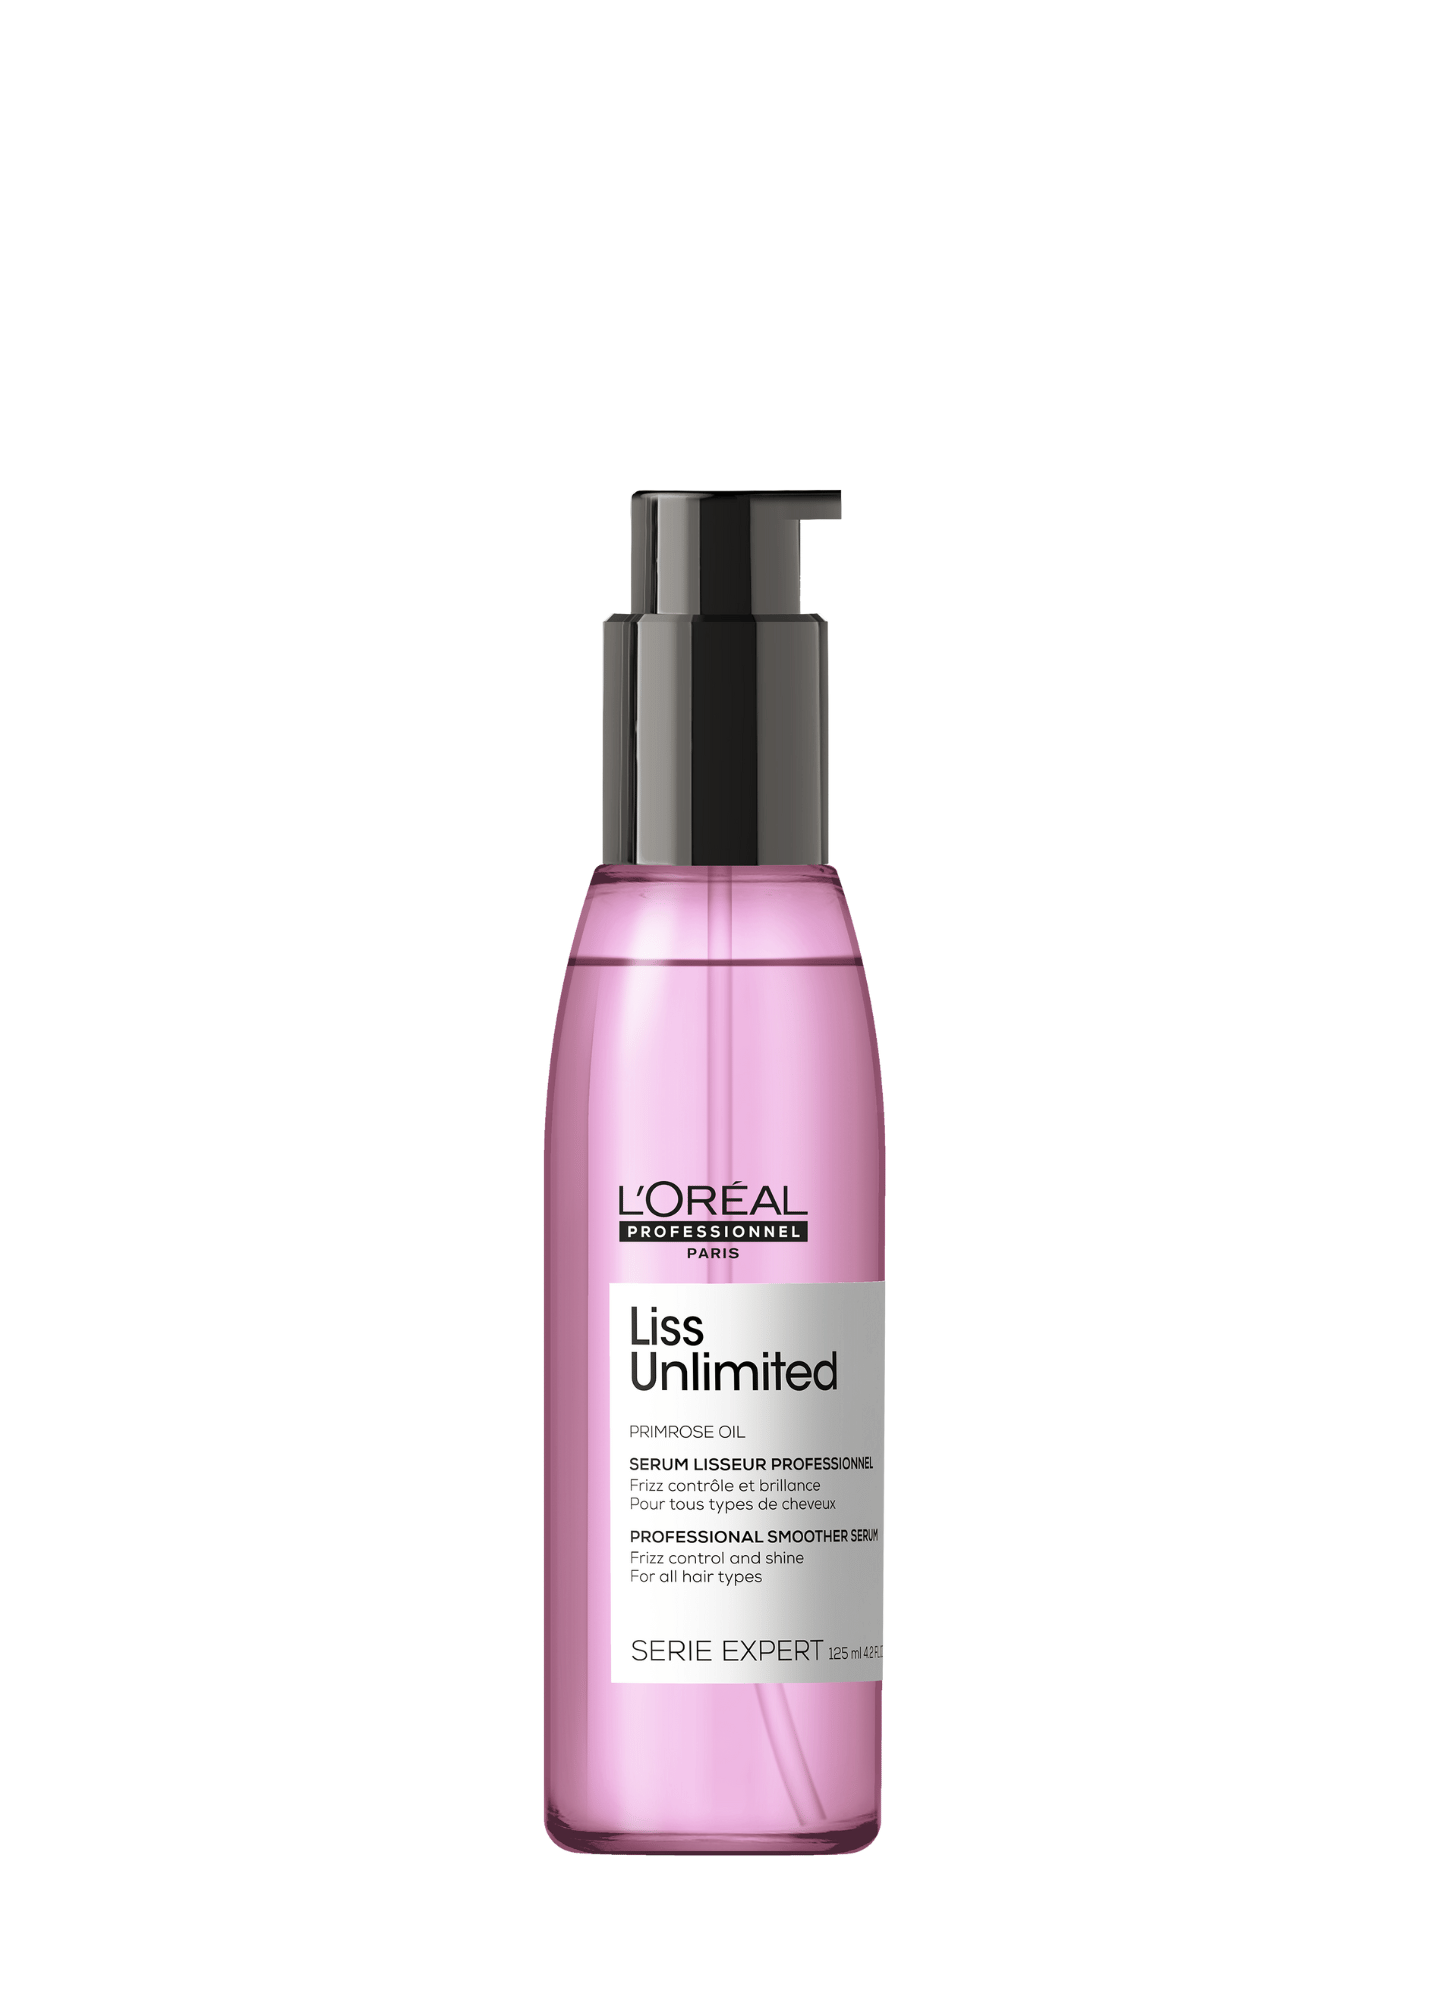 L'Oréal Professionnel Serie Expert Liss Unlimited Perfecting Oil Huile de brushing